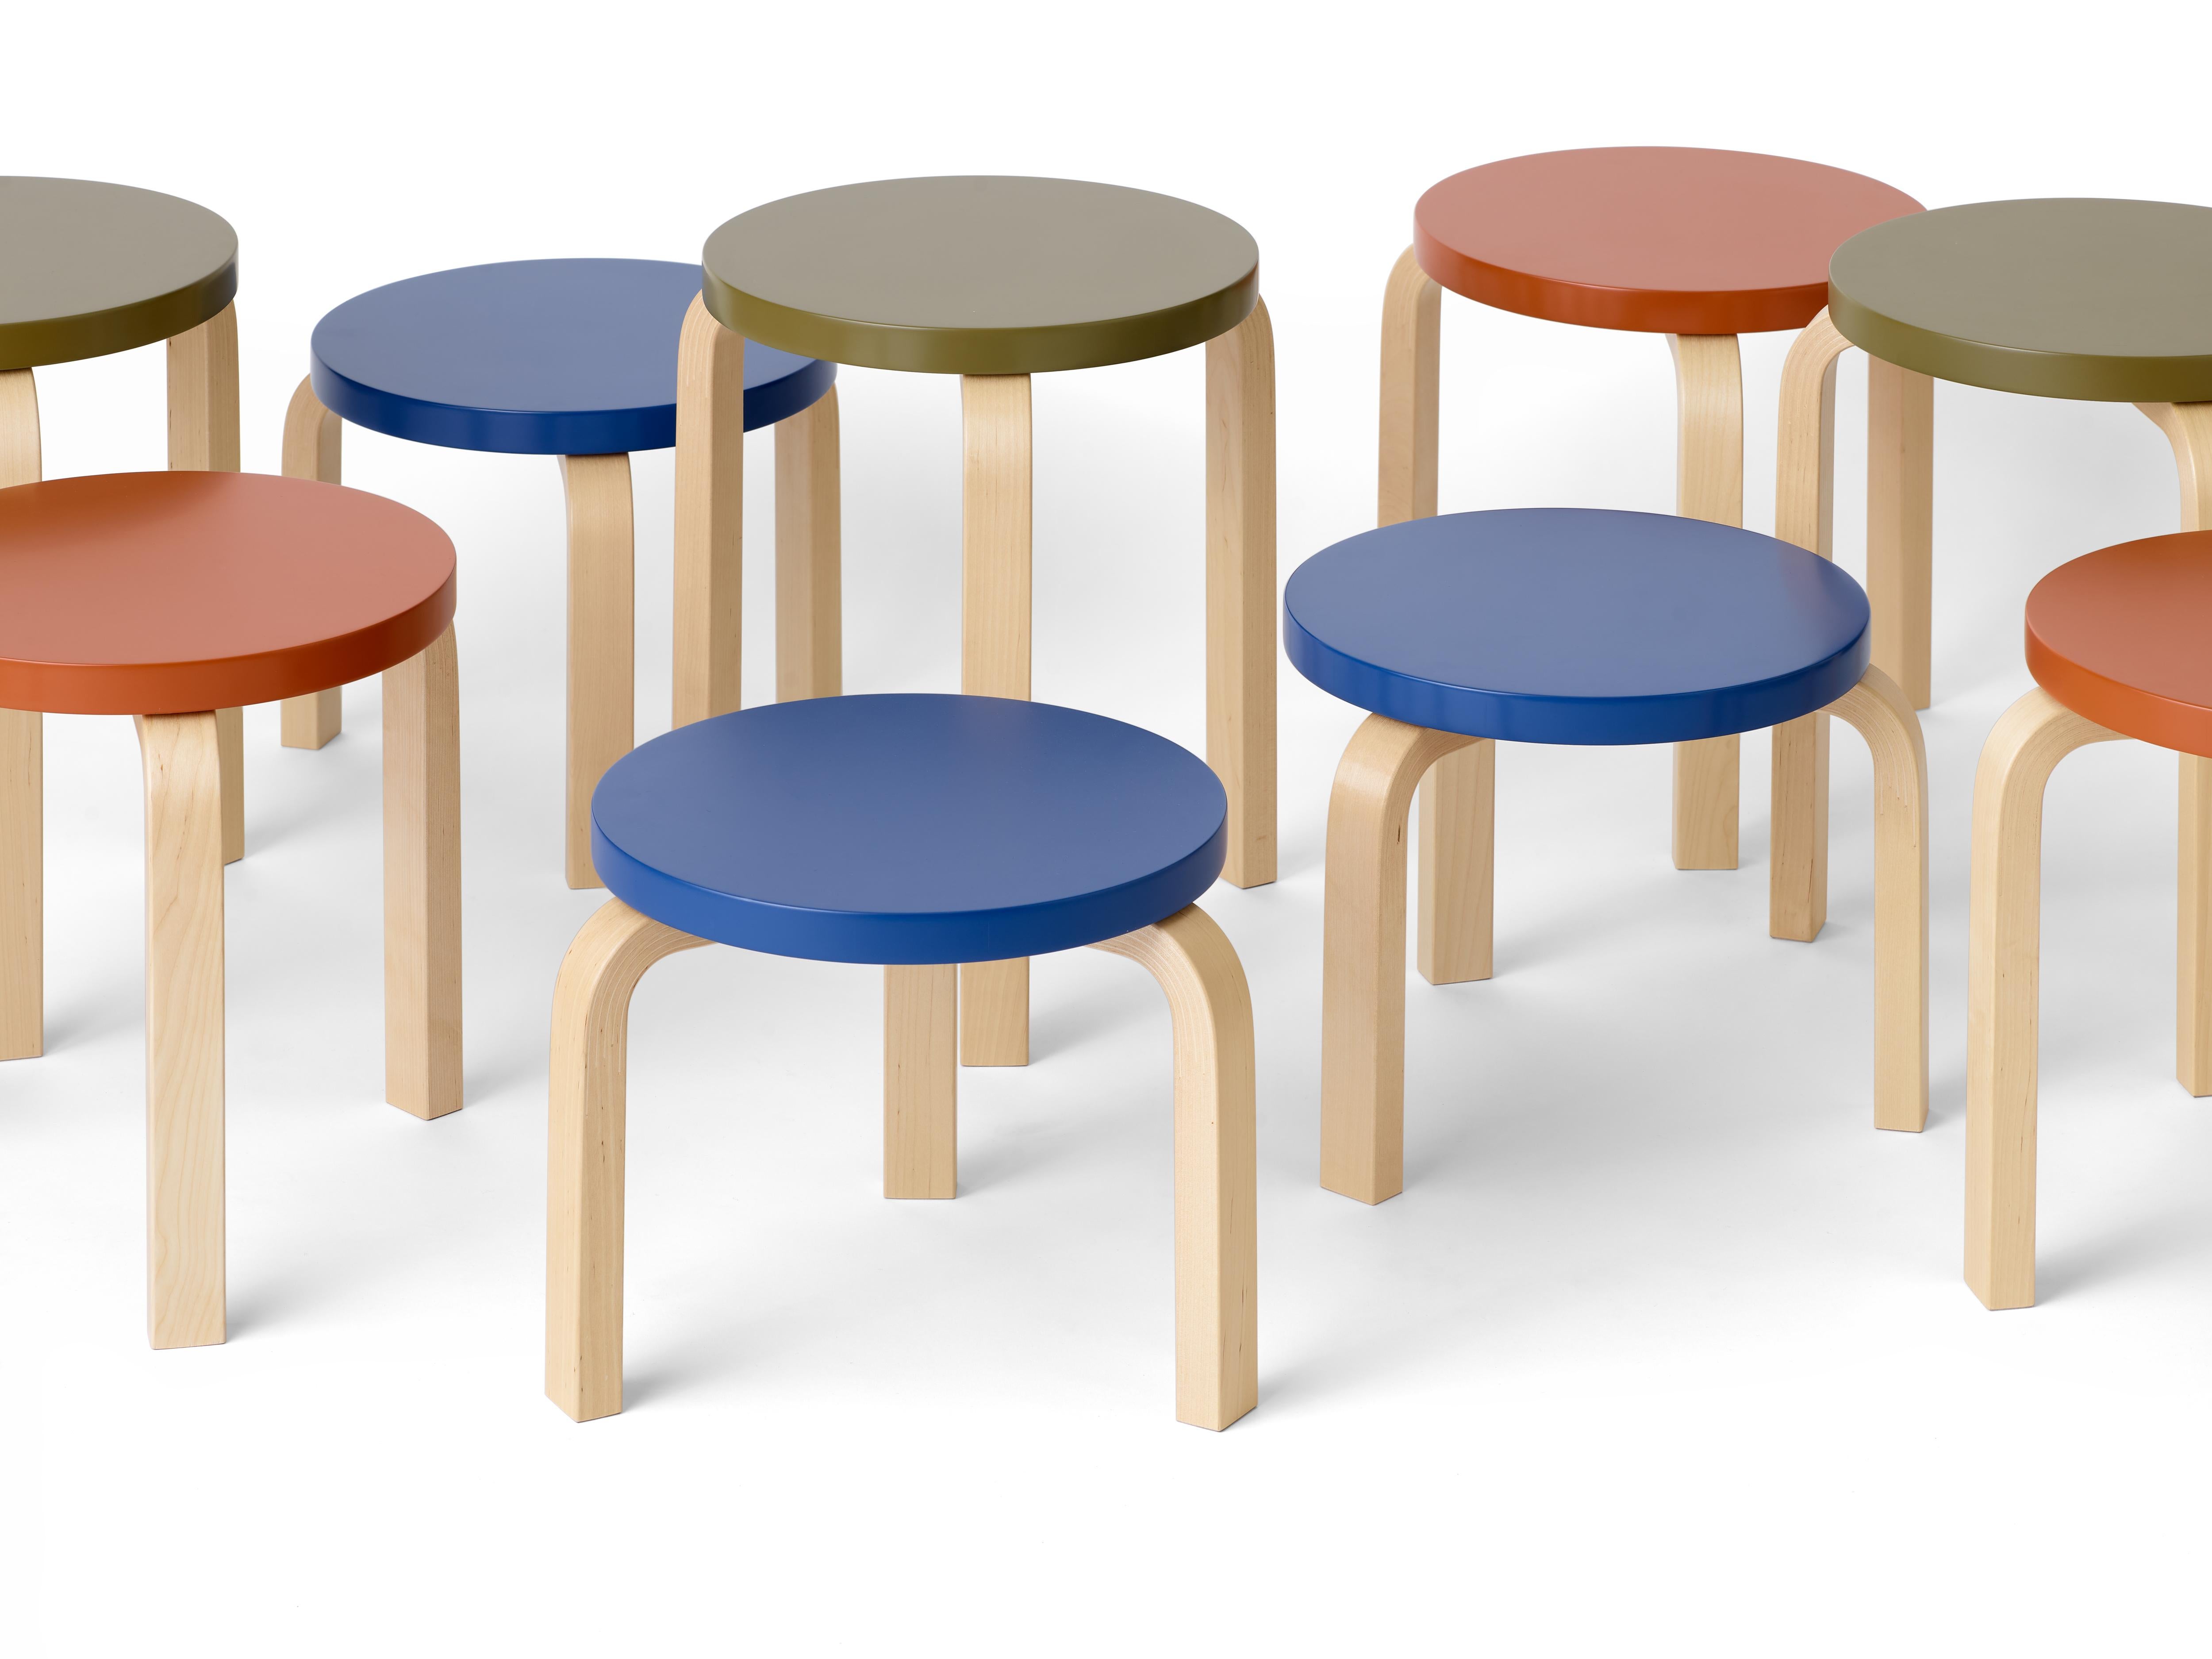 Birch Limited Edition Low Stool 60 in Moonstone by Artek and Heath